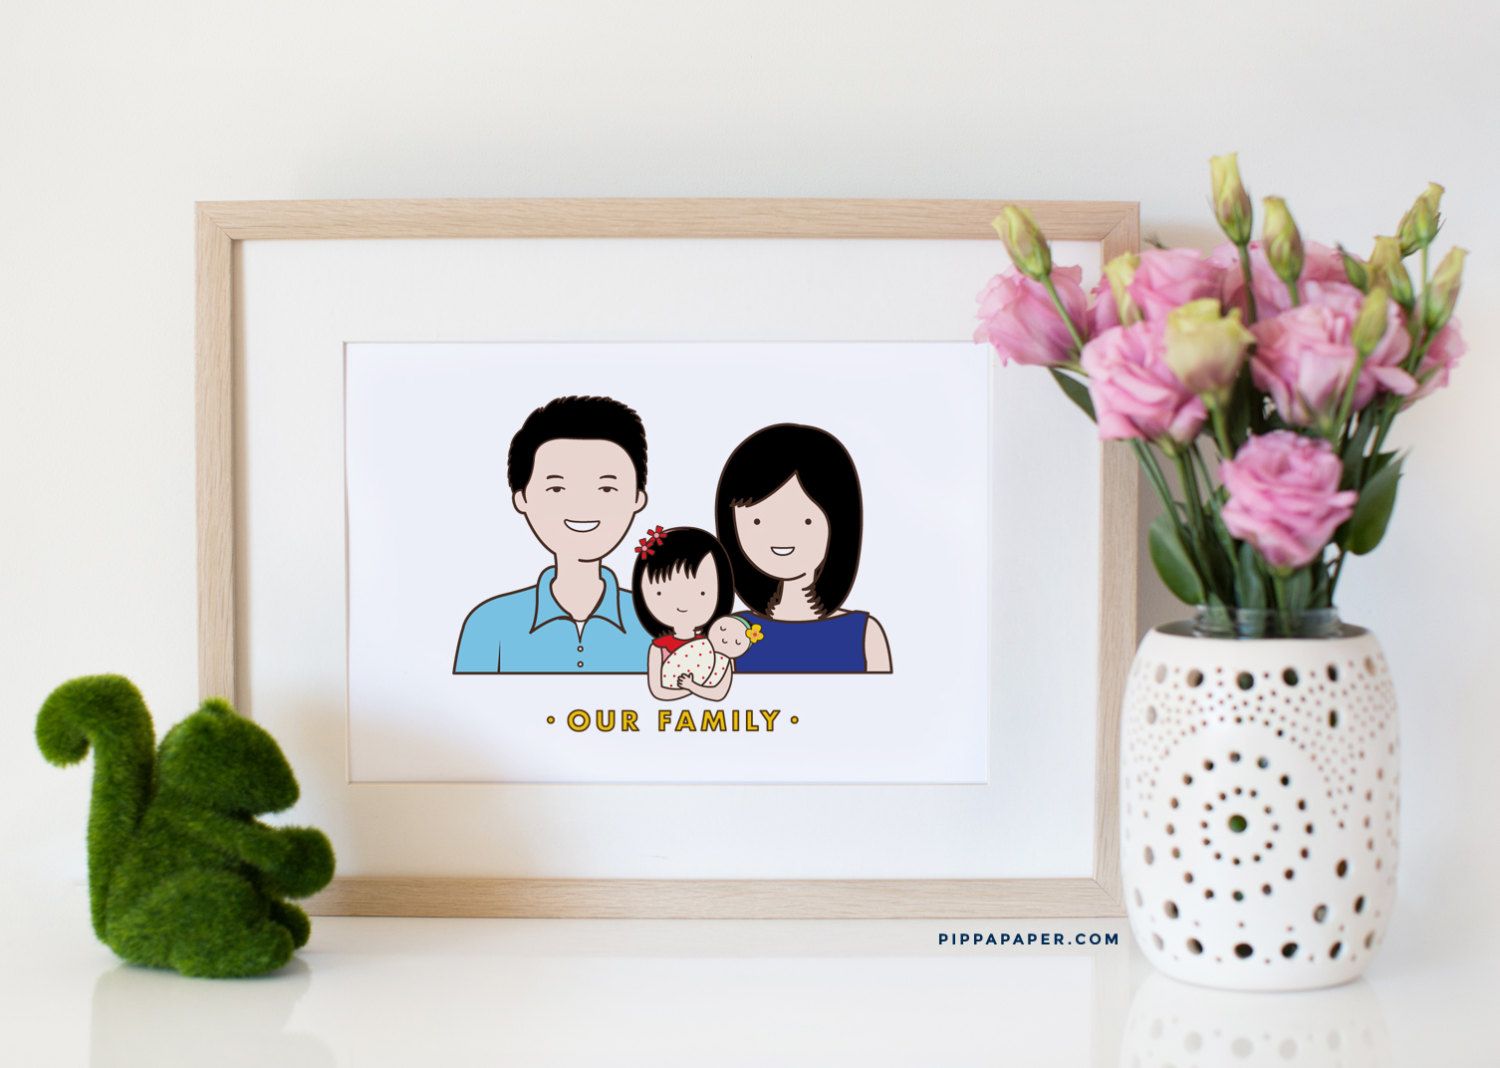 Affordable, modern custom family portraits | Pippa Paper